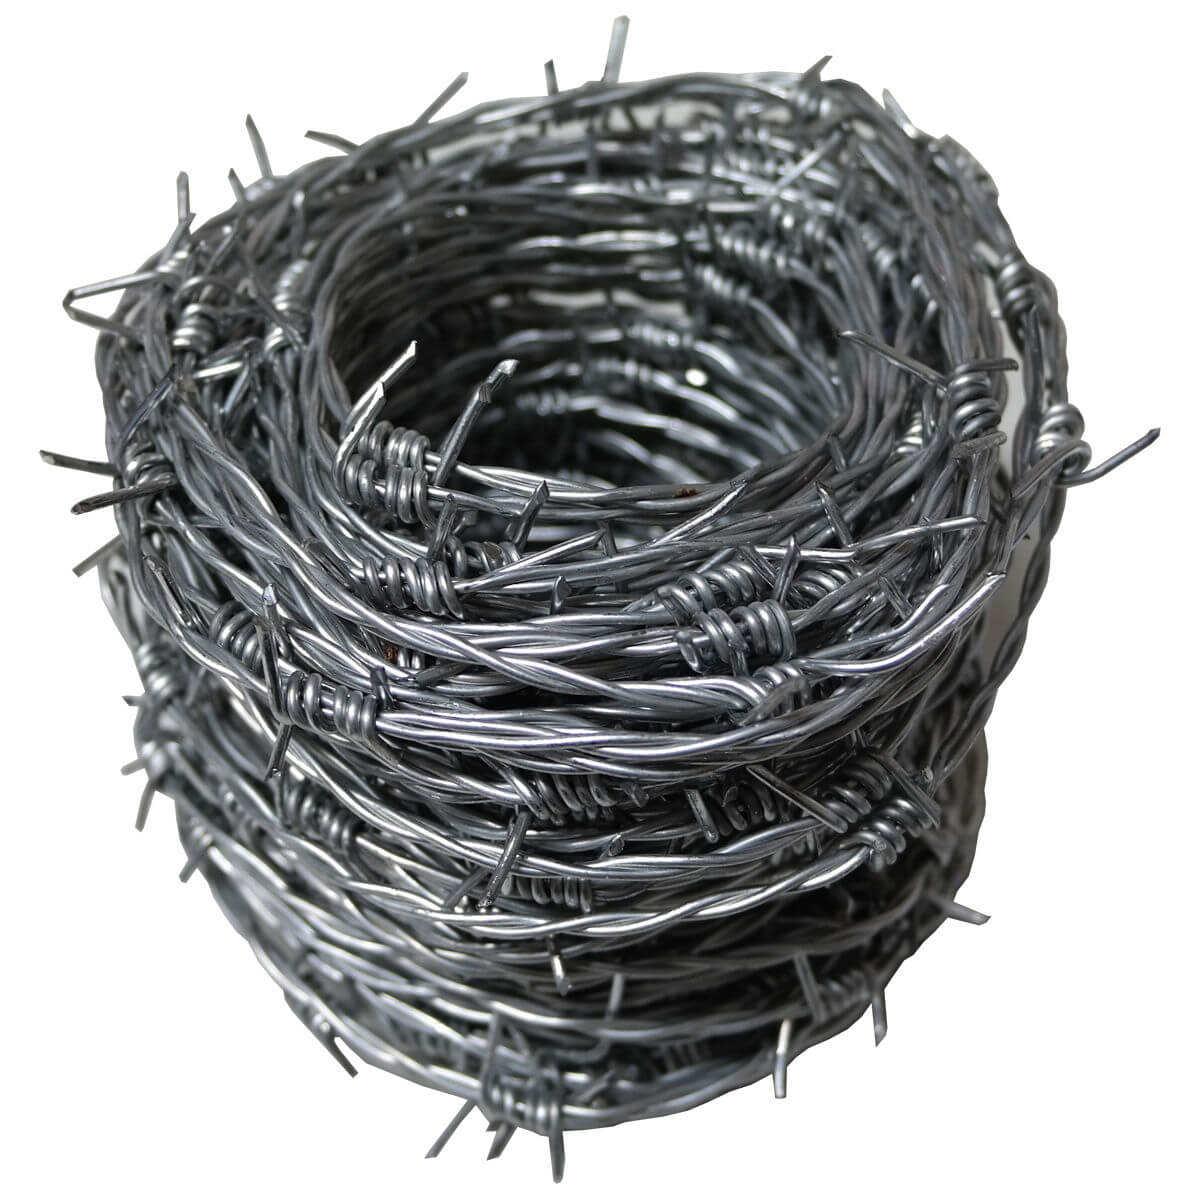 Long-lasting Protection: The Benefits of Installing Barbed Wire Fencing